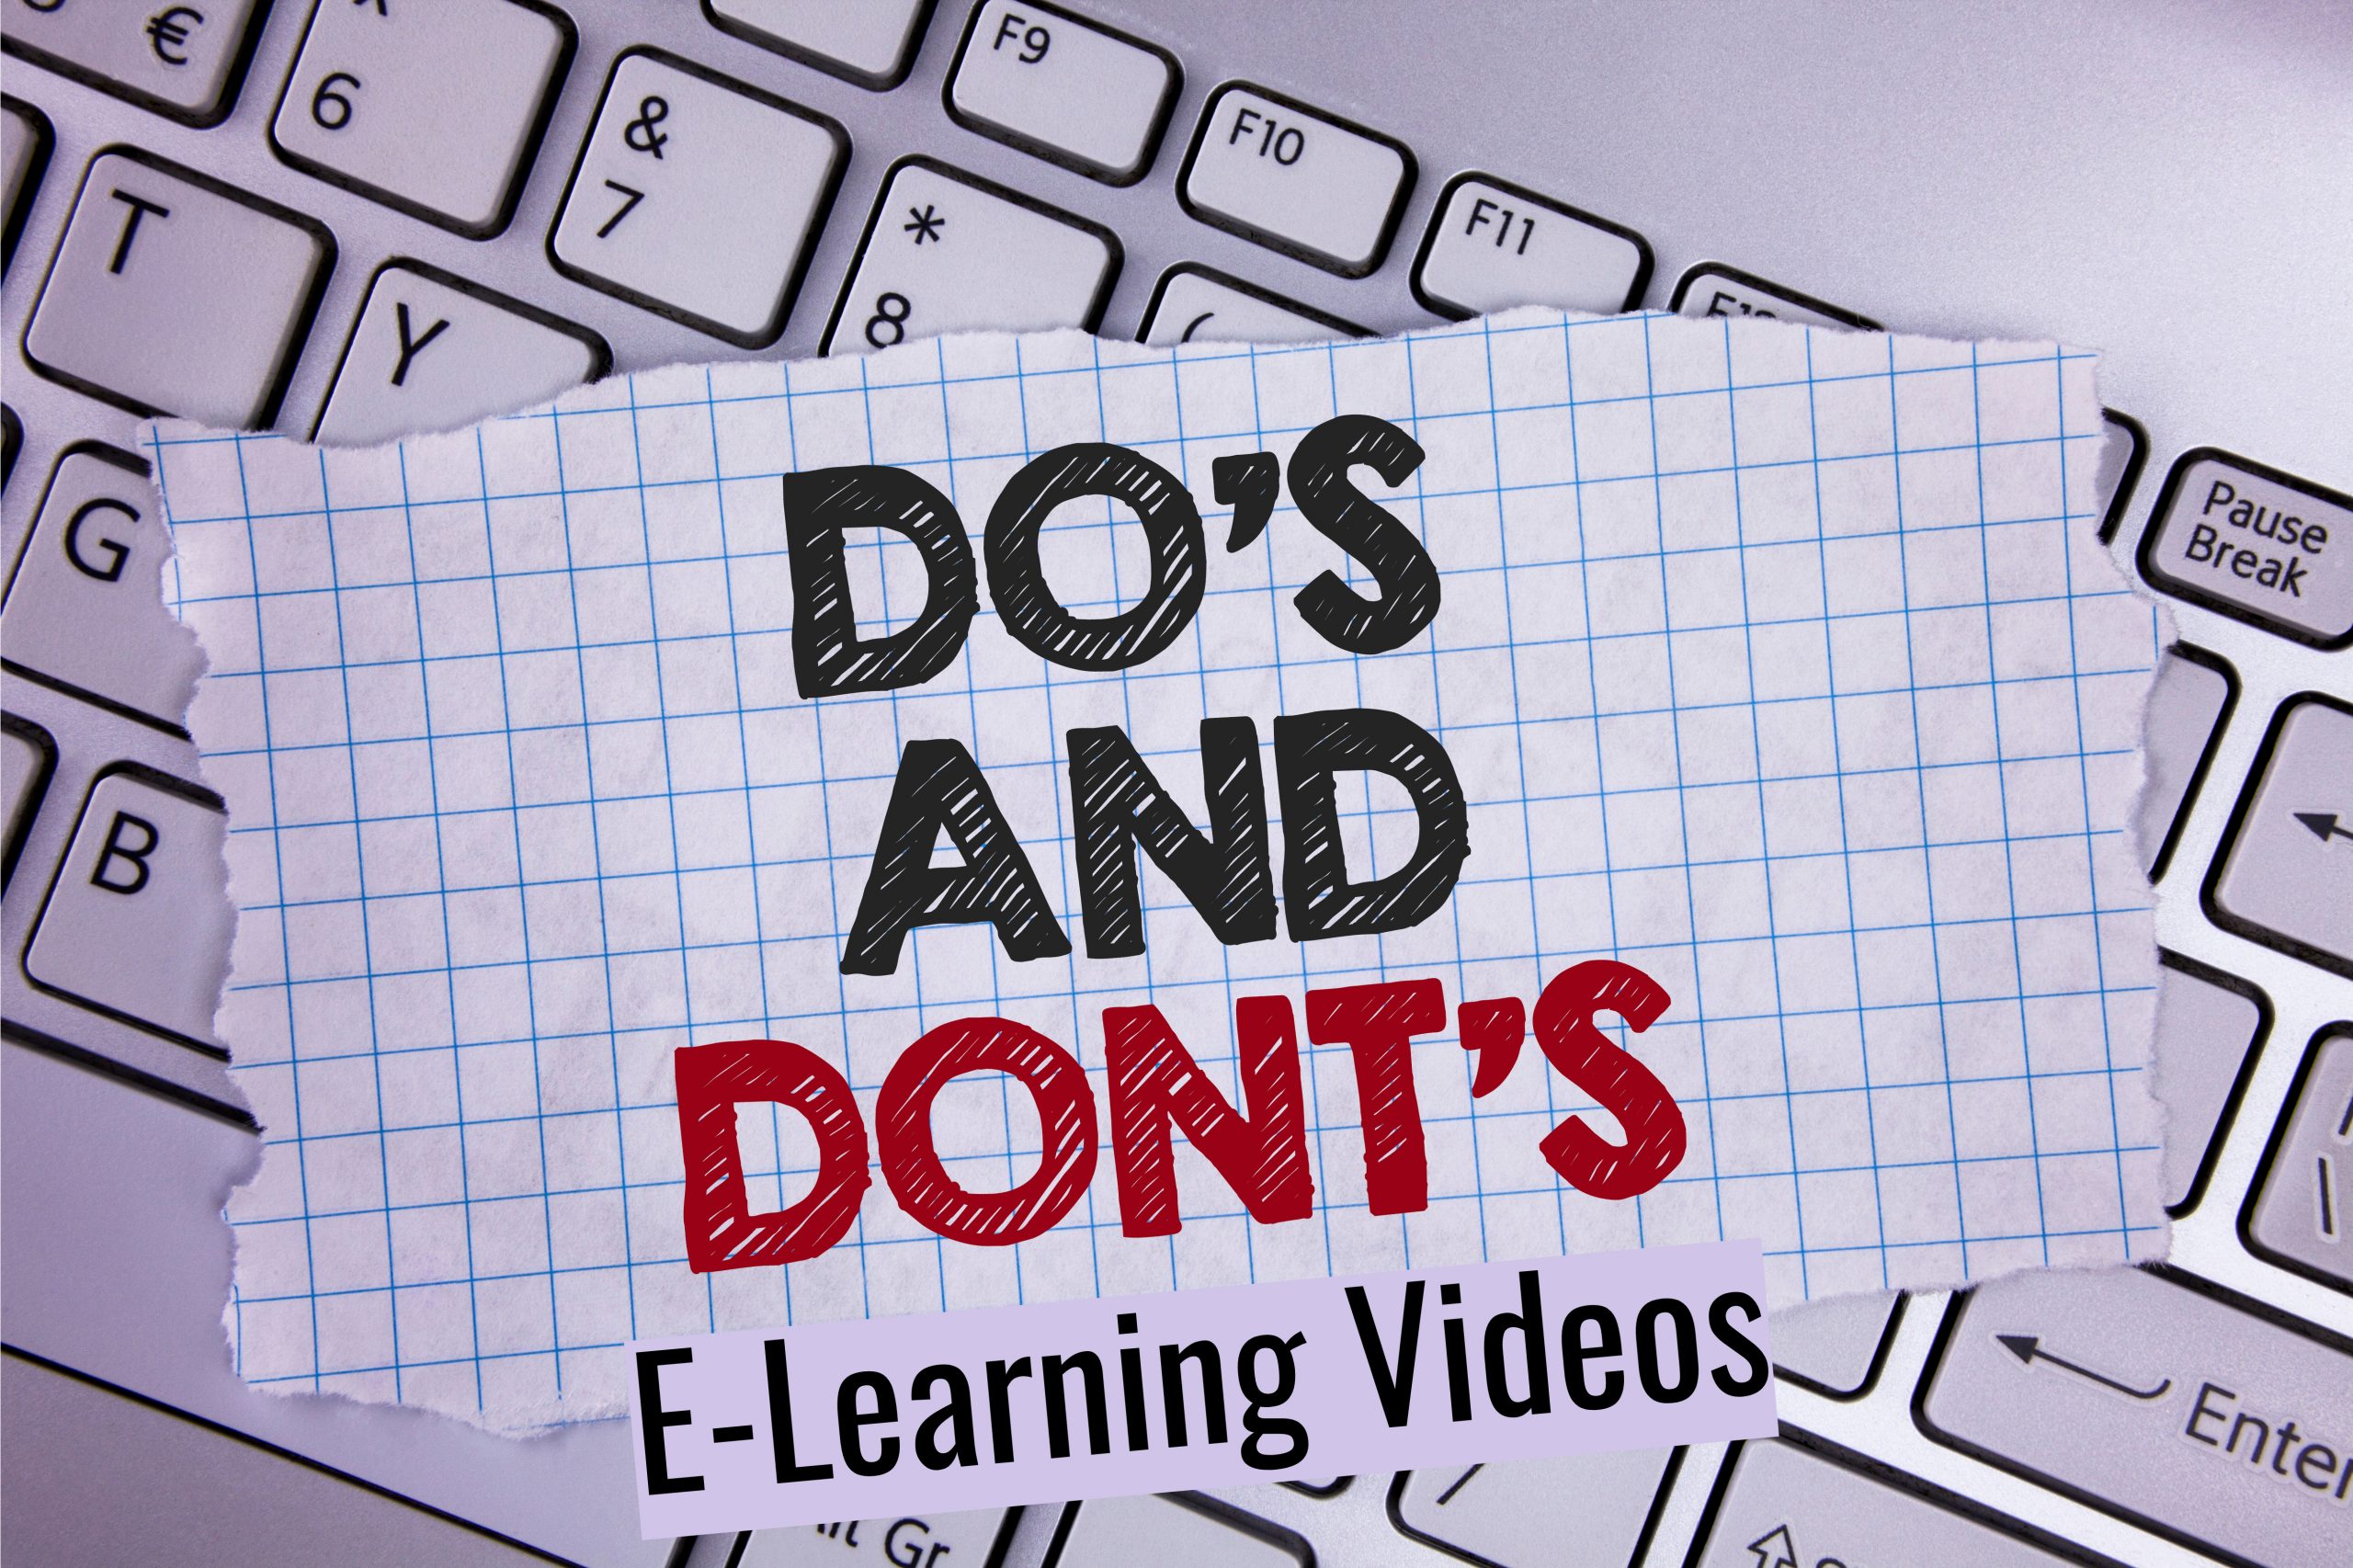 E donts. Картинки dos and donts. Do and donts. Email Etiquette.